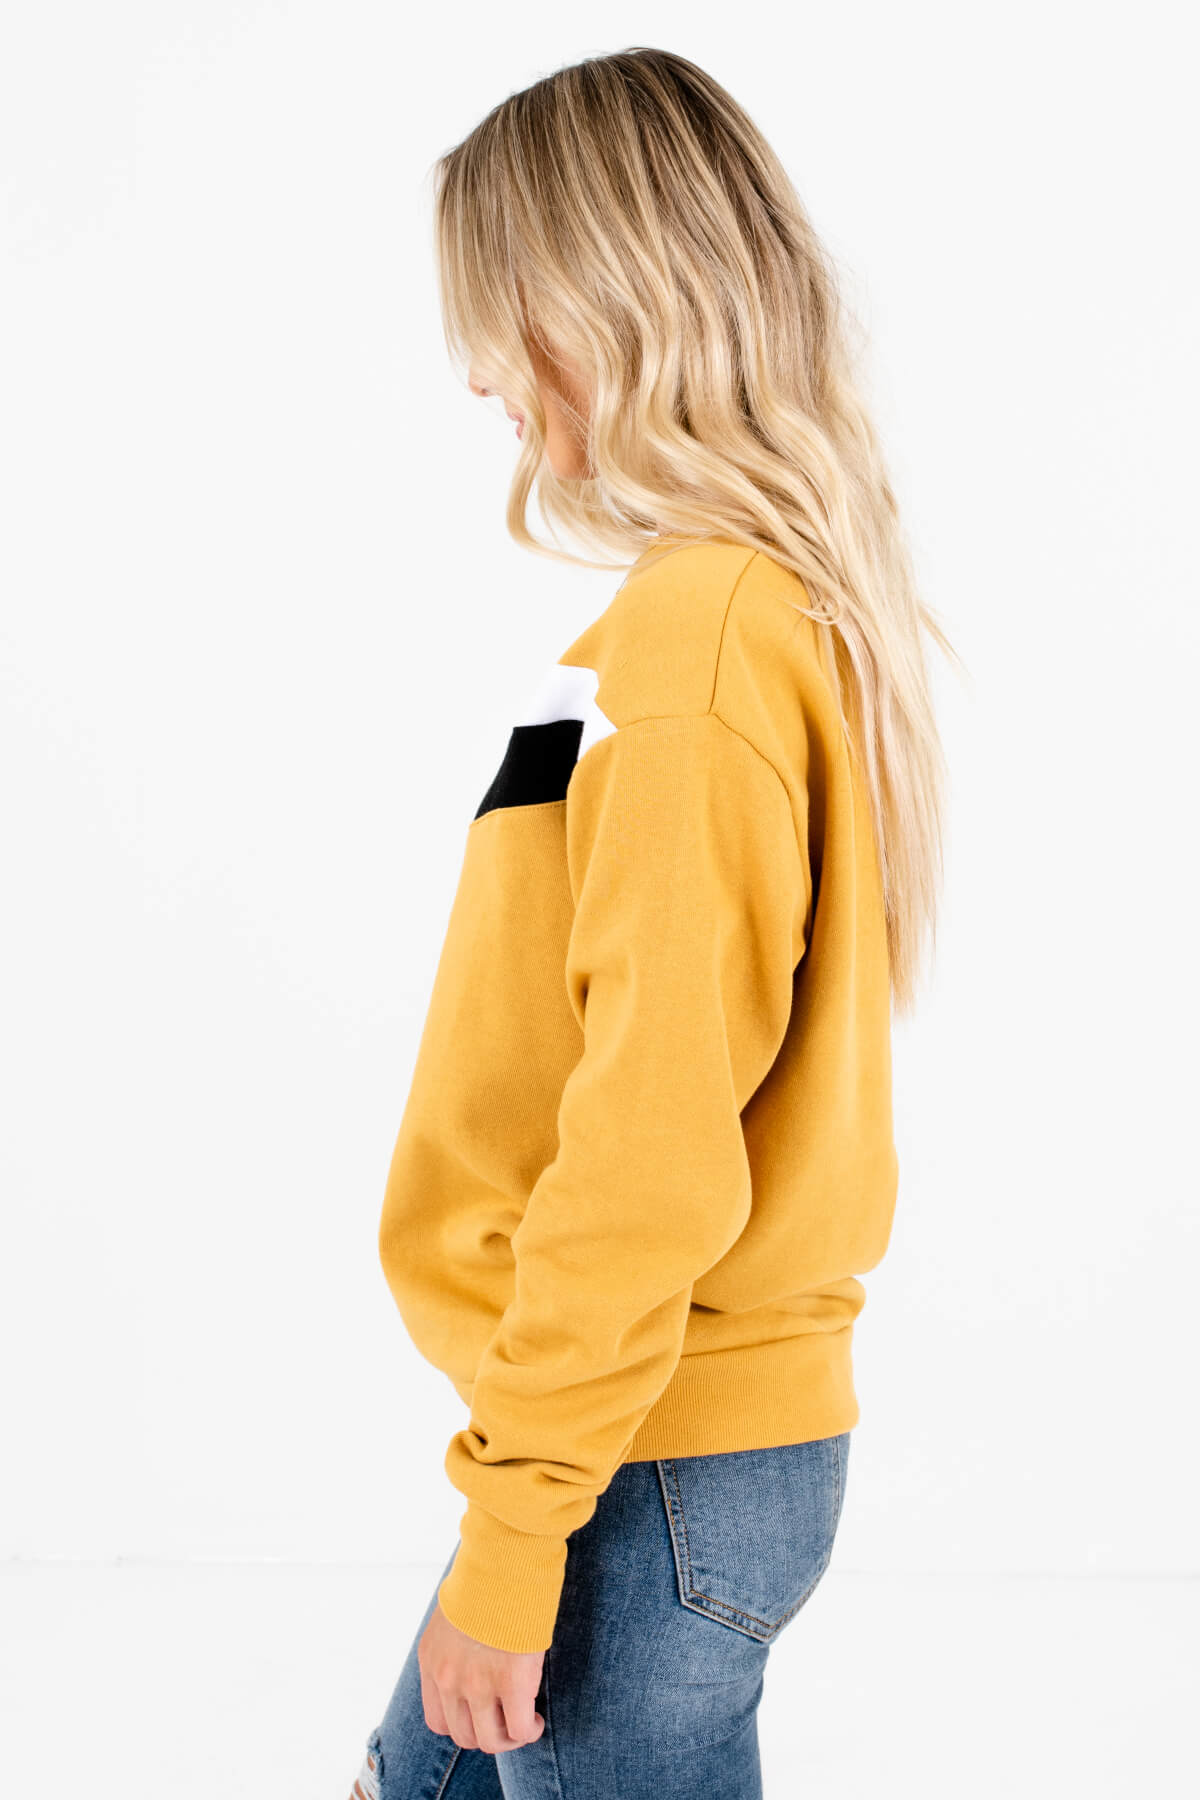 Women’s Mustard Yellow Warm and Cozy Boutique Pullover